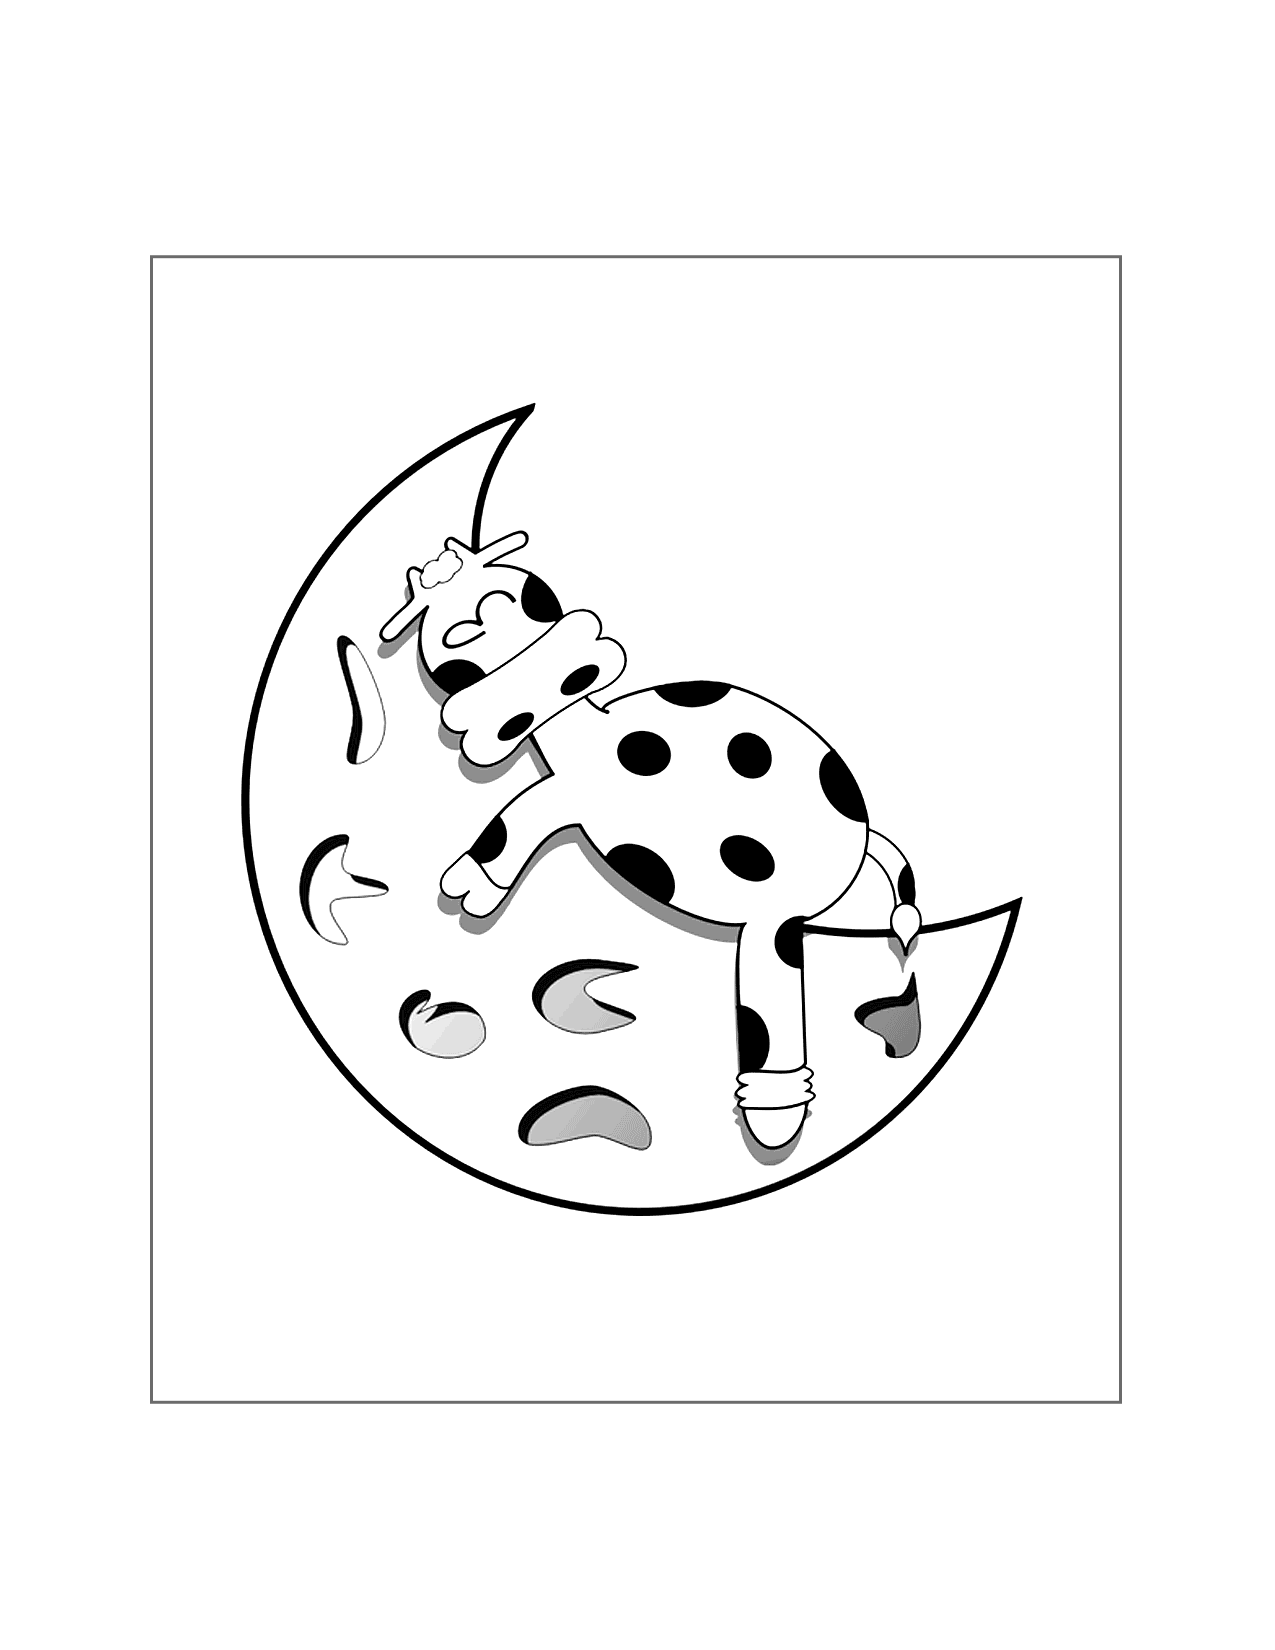 Cow Asleep On The Moon Coloring Page